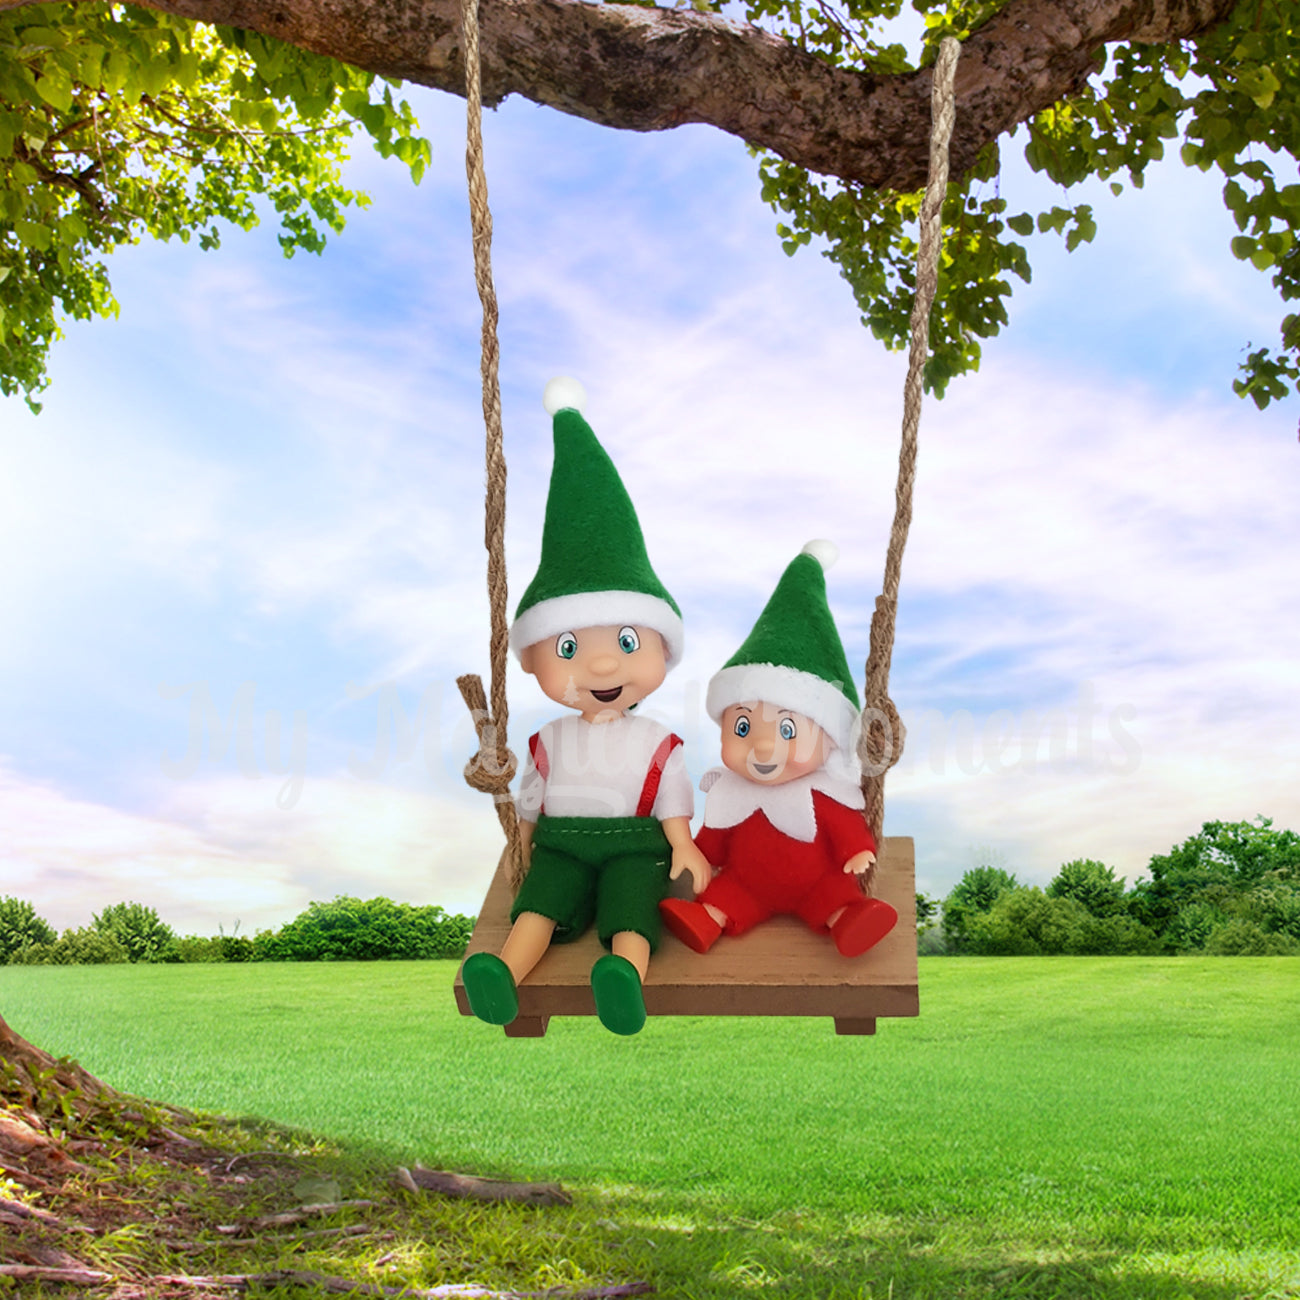 Elf toddler on a swing and an elf baby